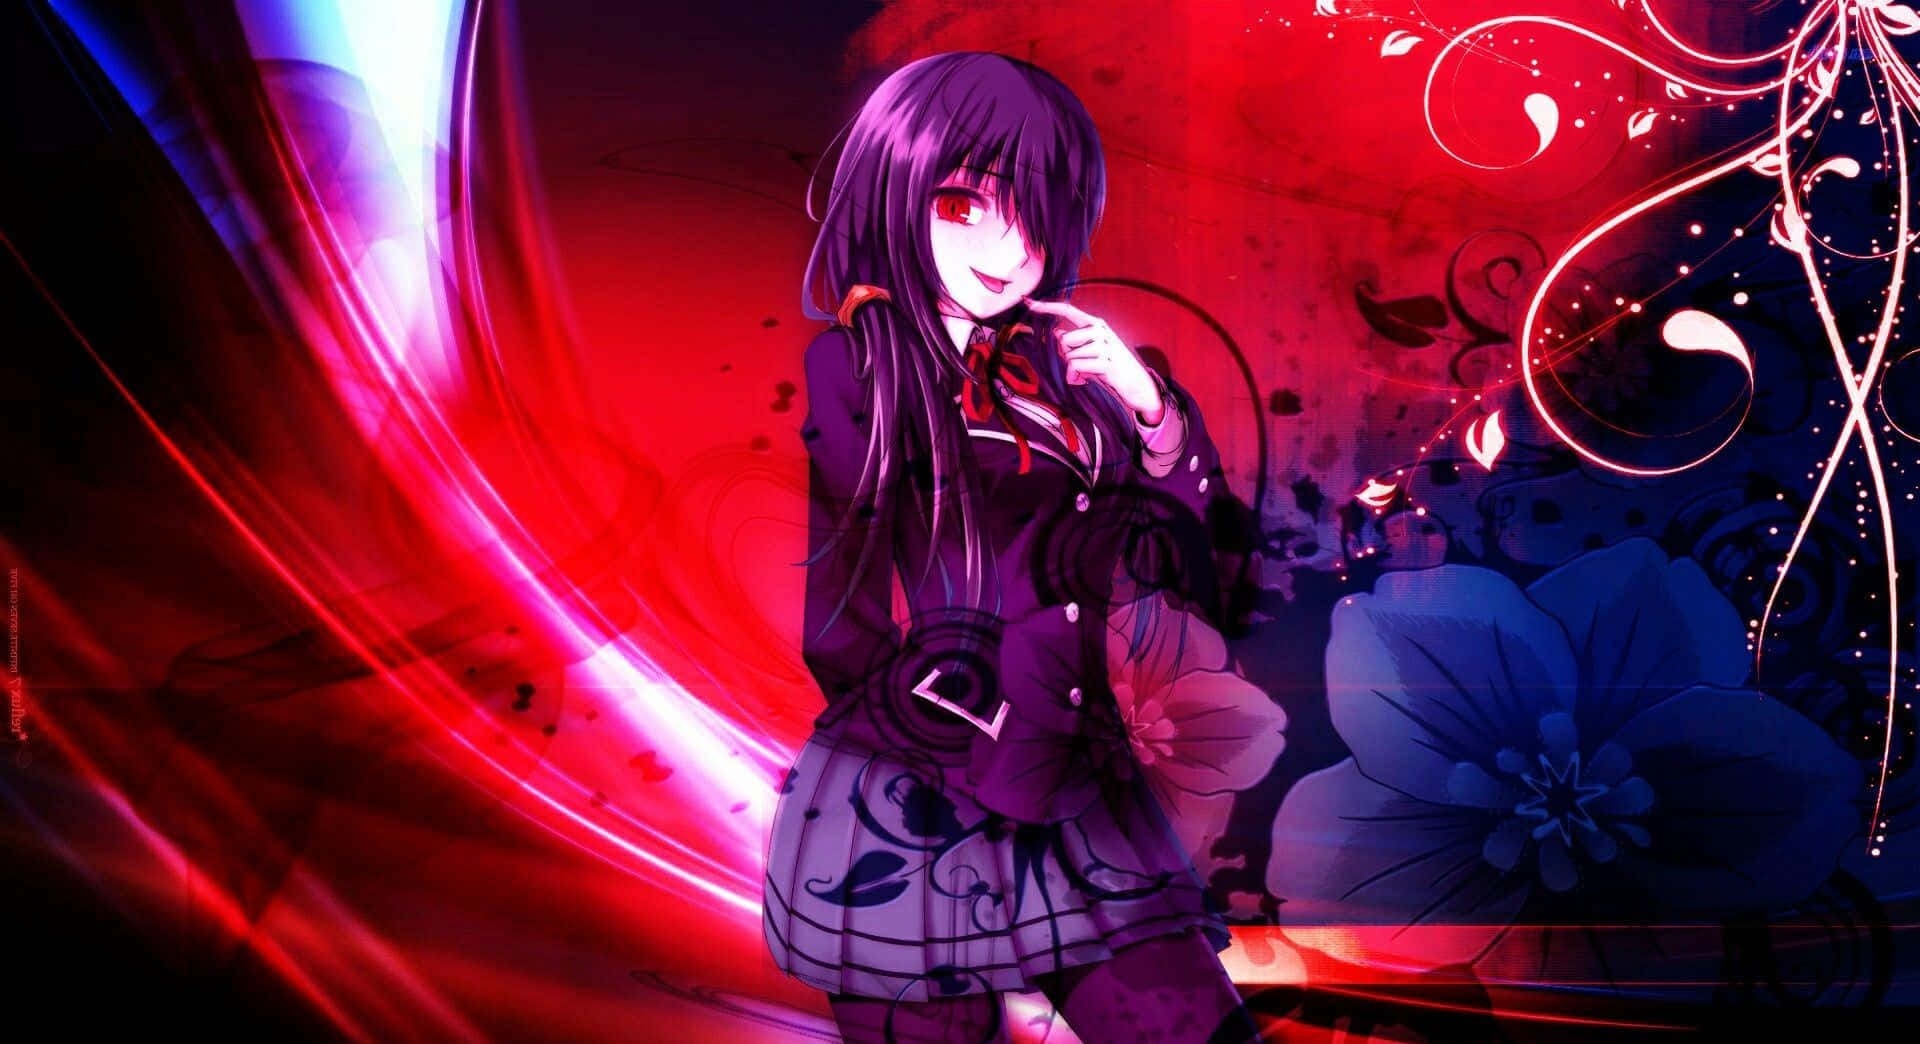 Mysterious Anime Girl Red Abstract Background Wallpaper